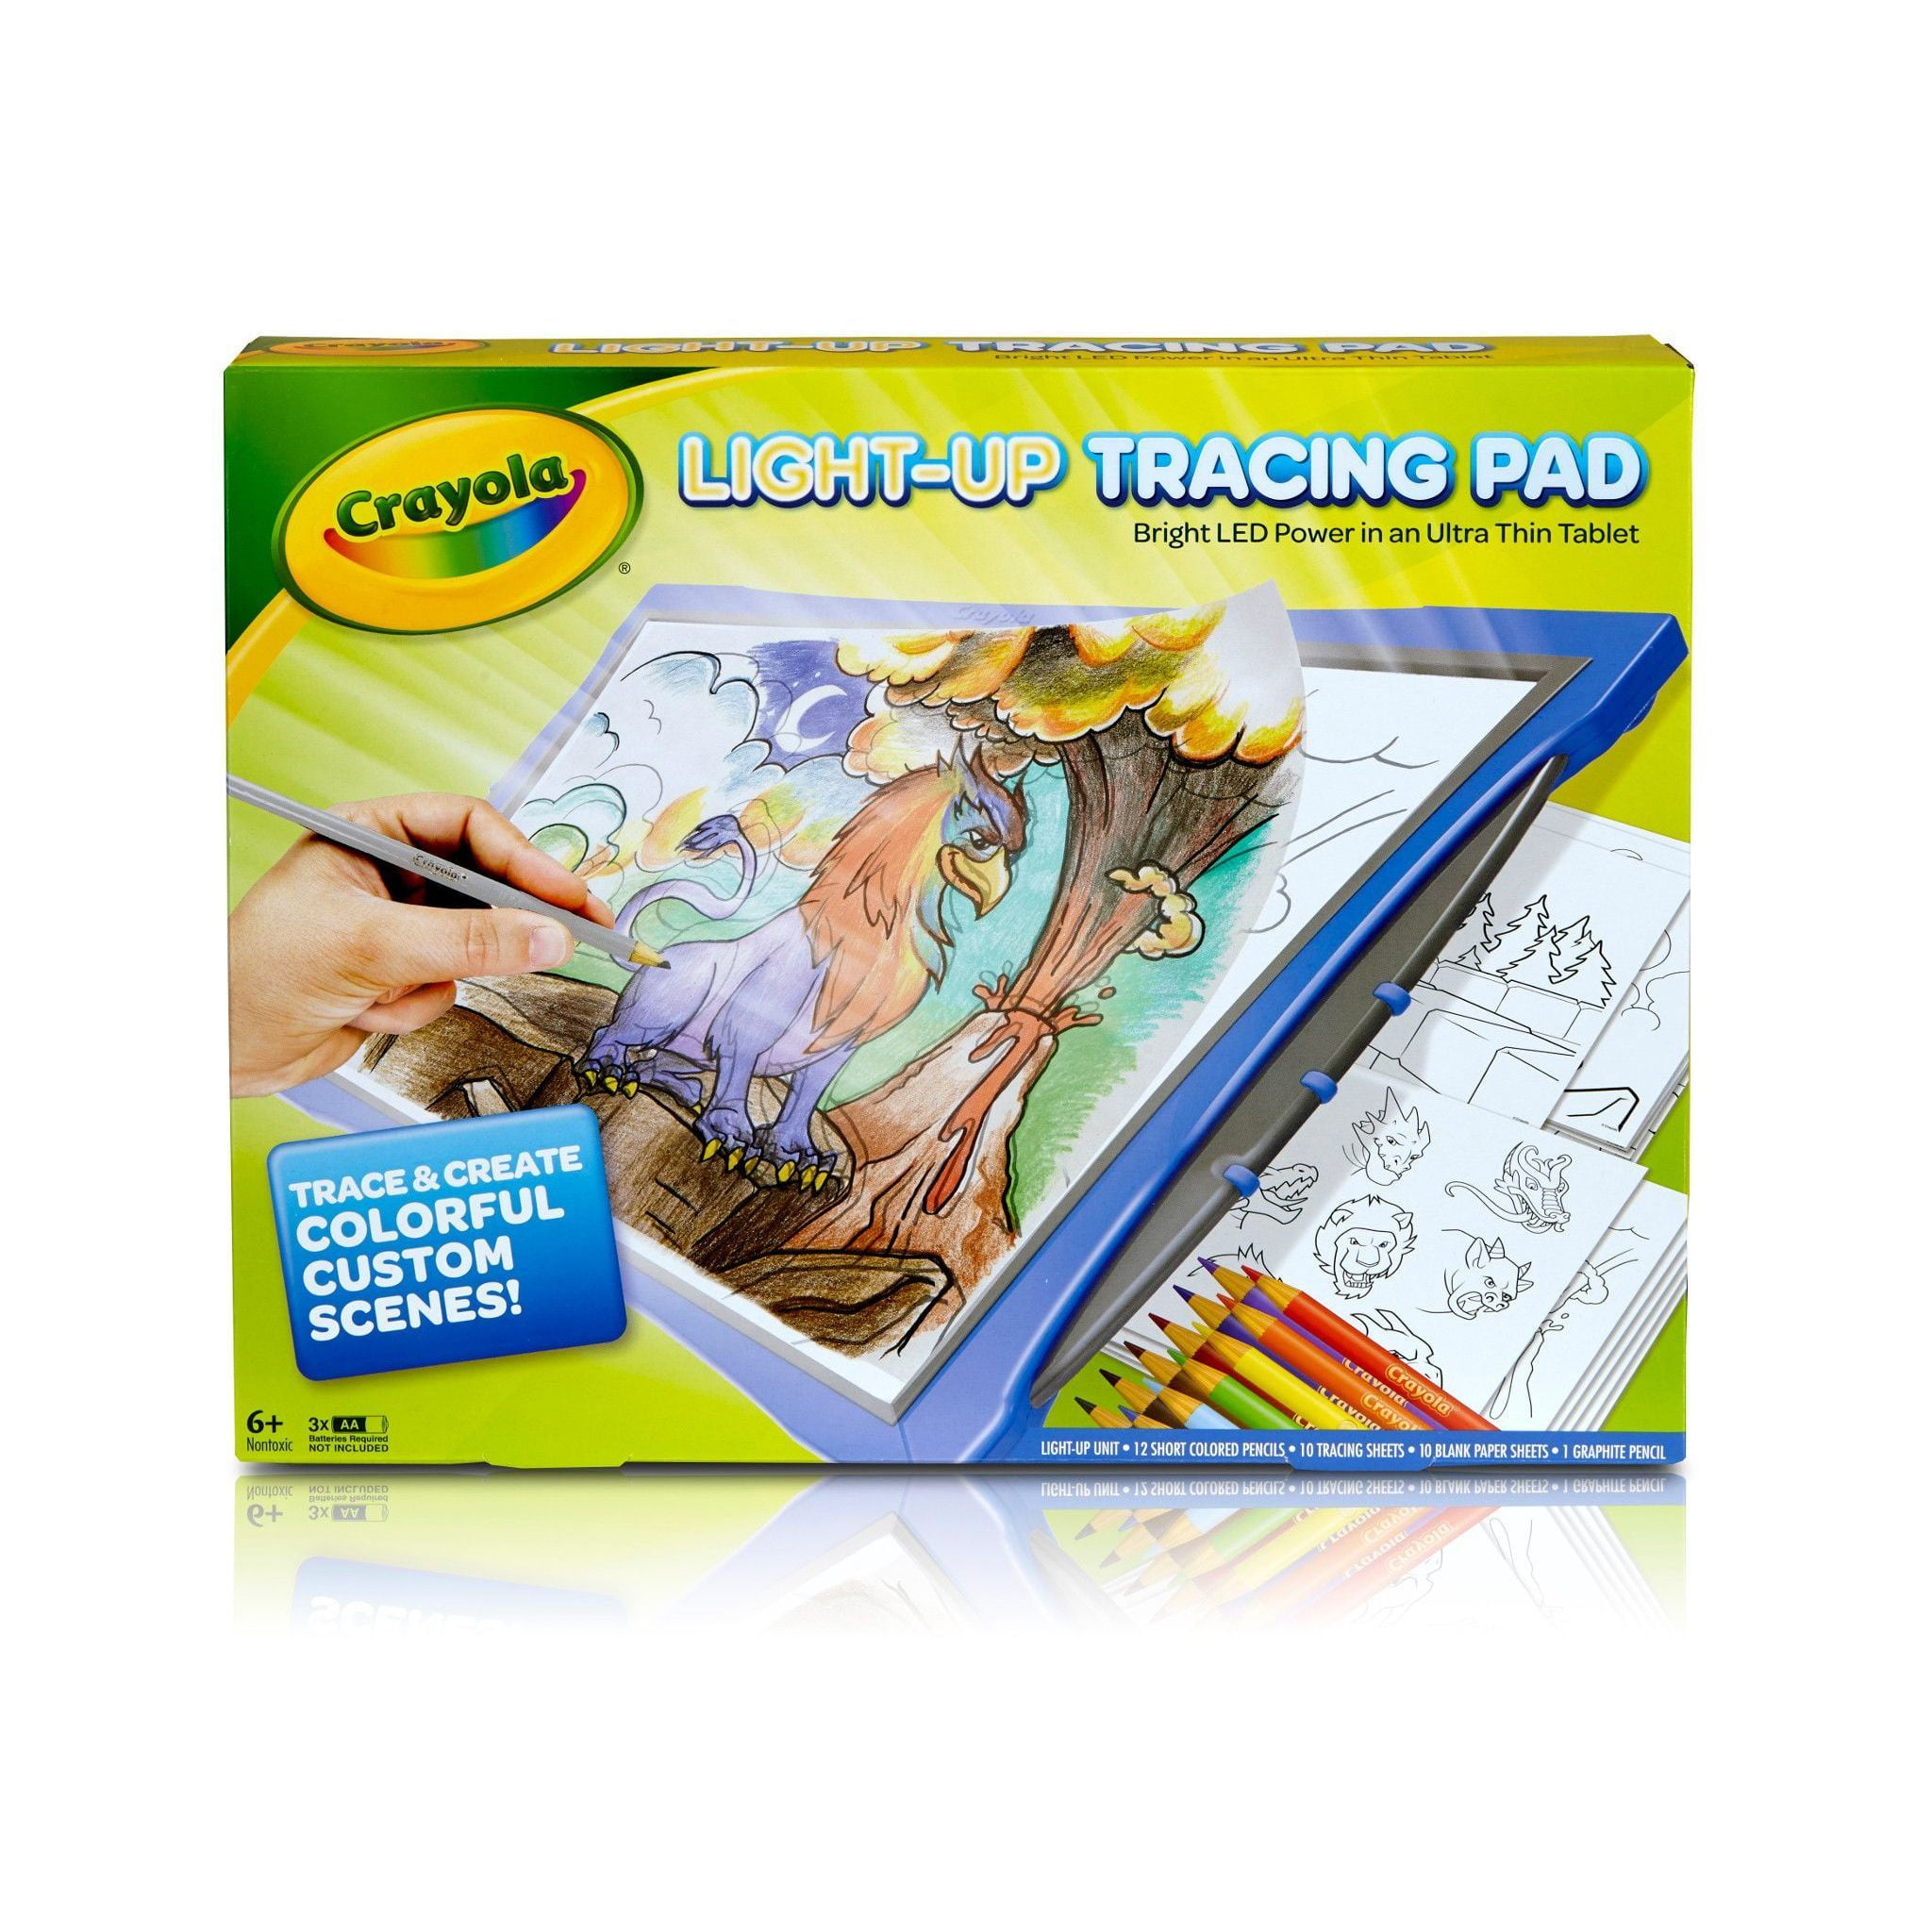 Sketch Book for Girls: Arts and Crafts Drawing Pad with Blank Paper for the  Creative Girl (Best Gifts for Ages 9, 10, 11, 12, 13)